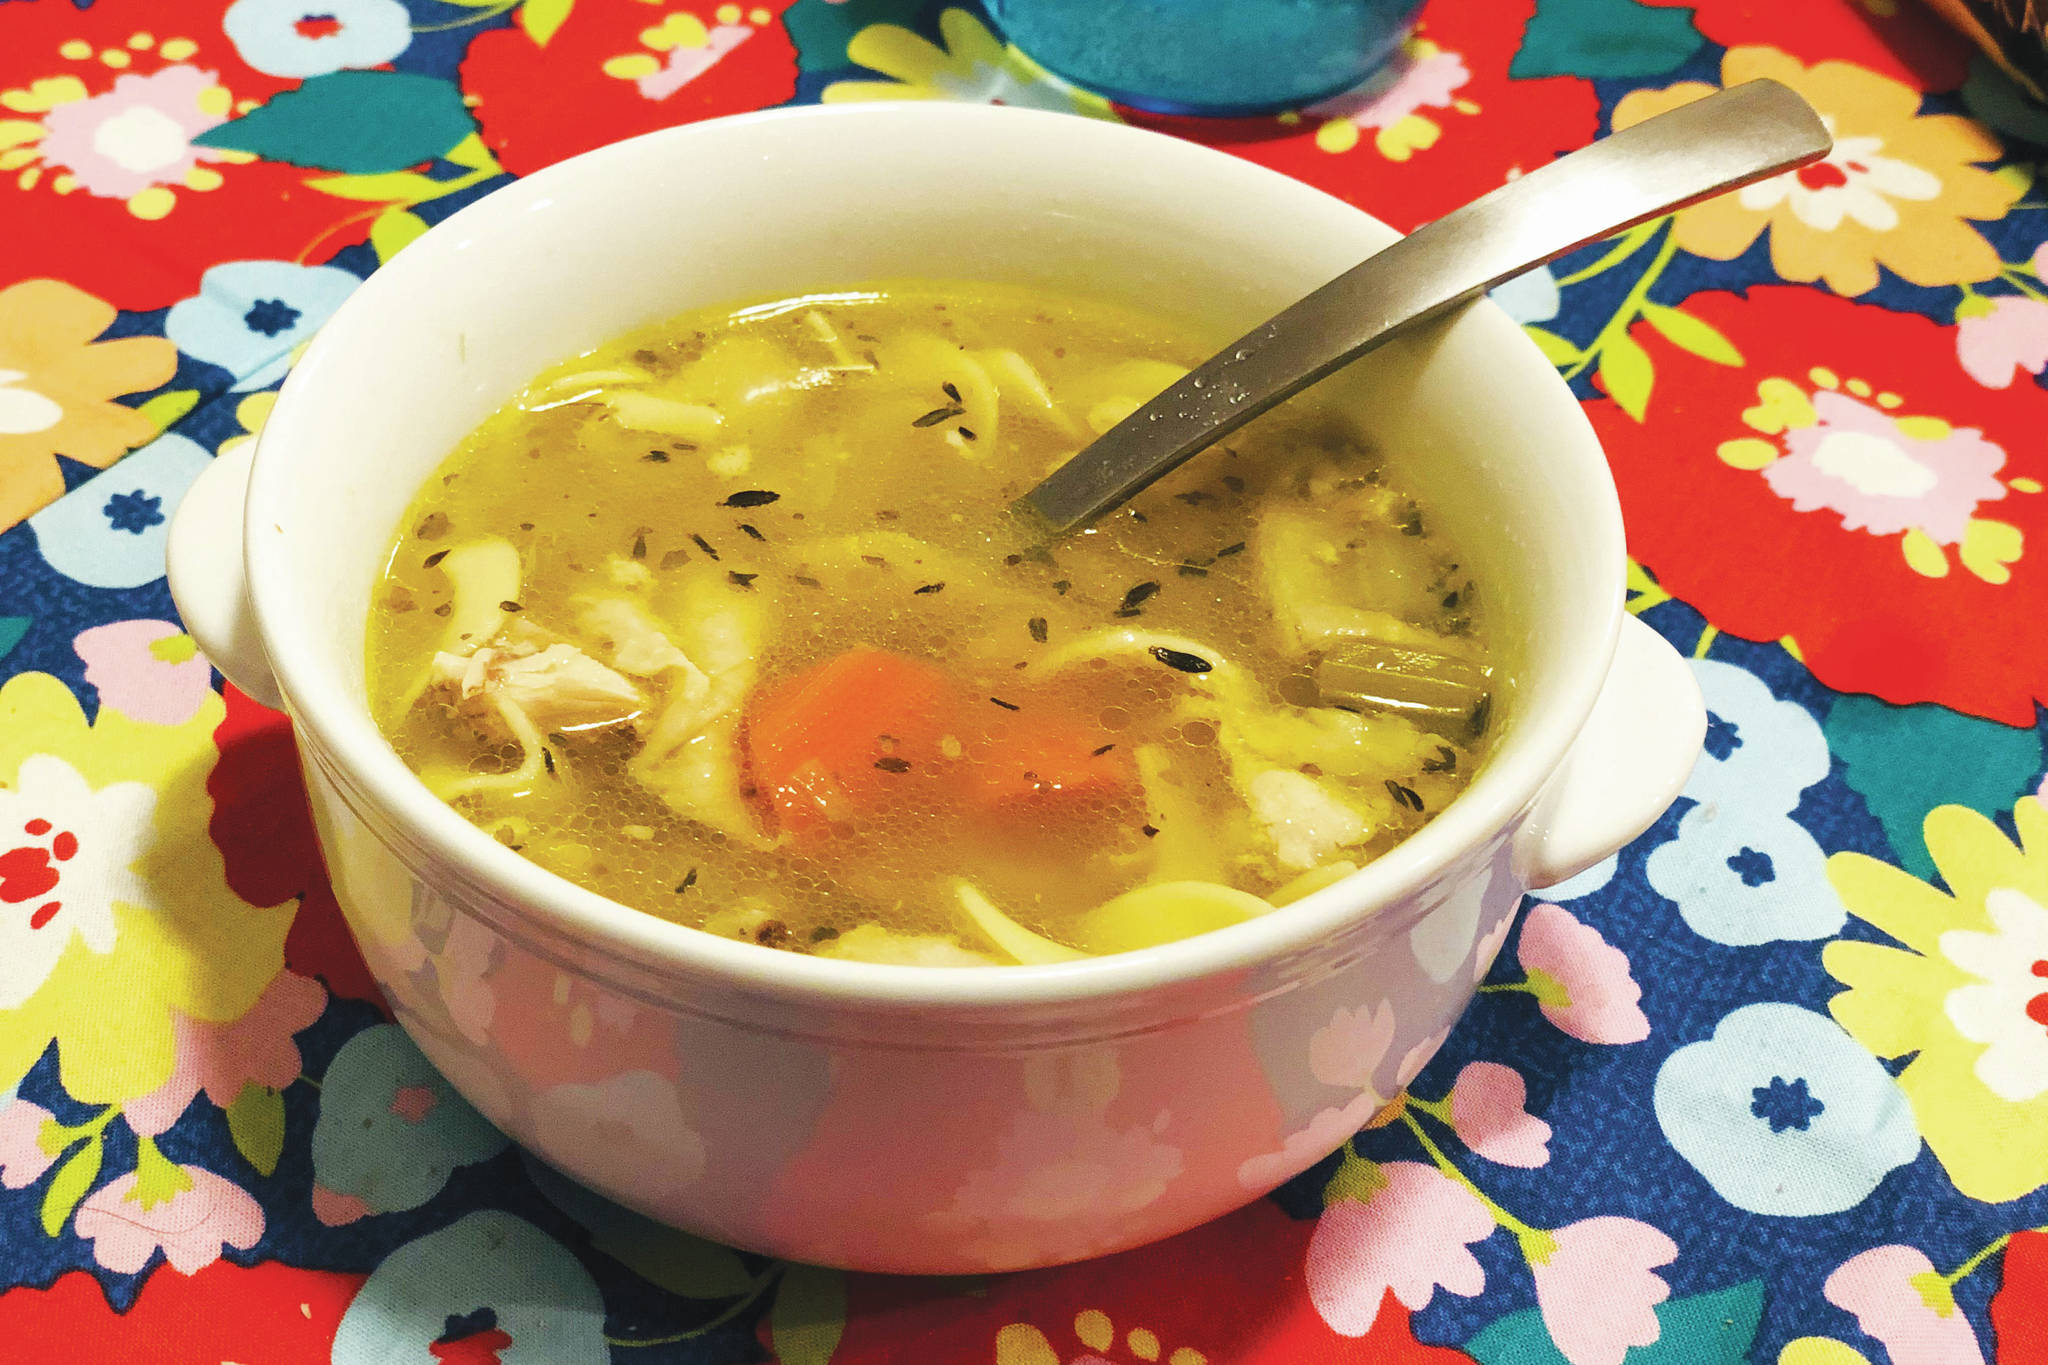 Victoria Petersen / Peninsula Clarion
Chicken noodle soup is a bowl of comfort during challenging times.